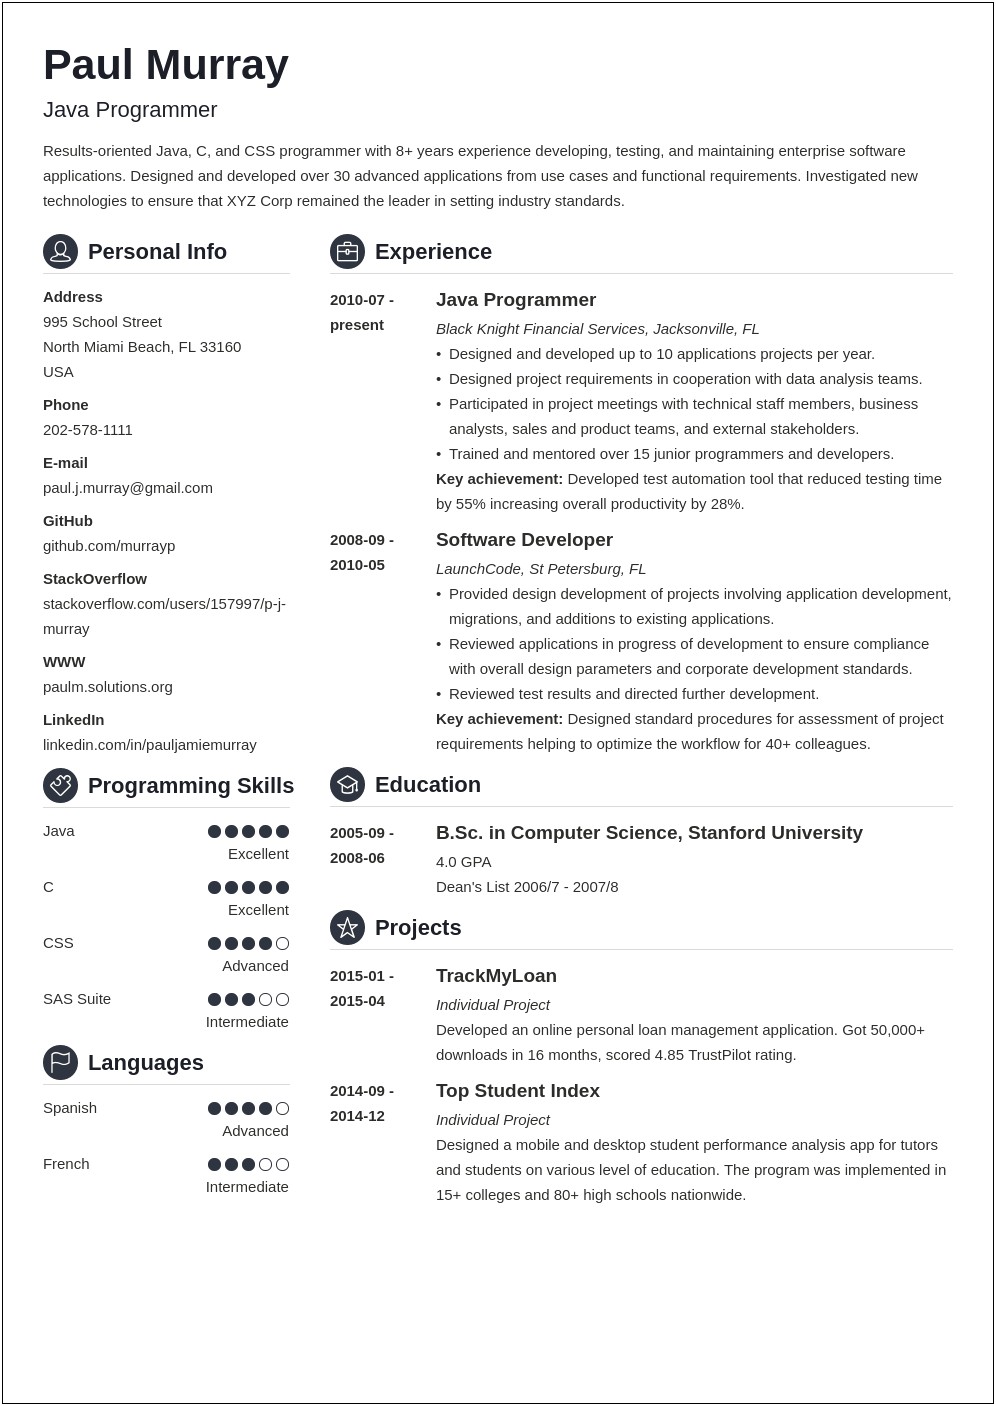 Example Resume With Programming Experience